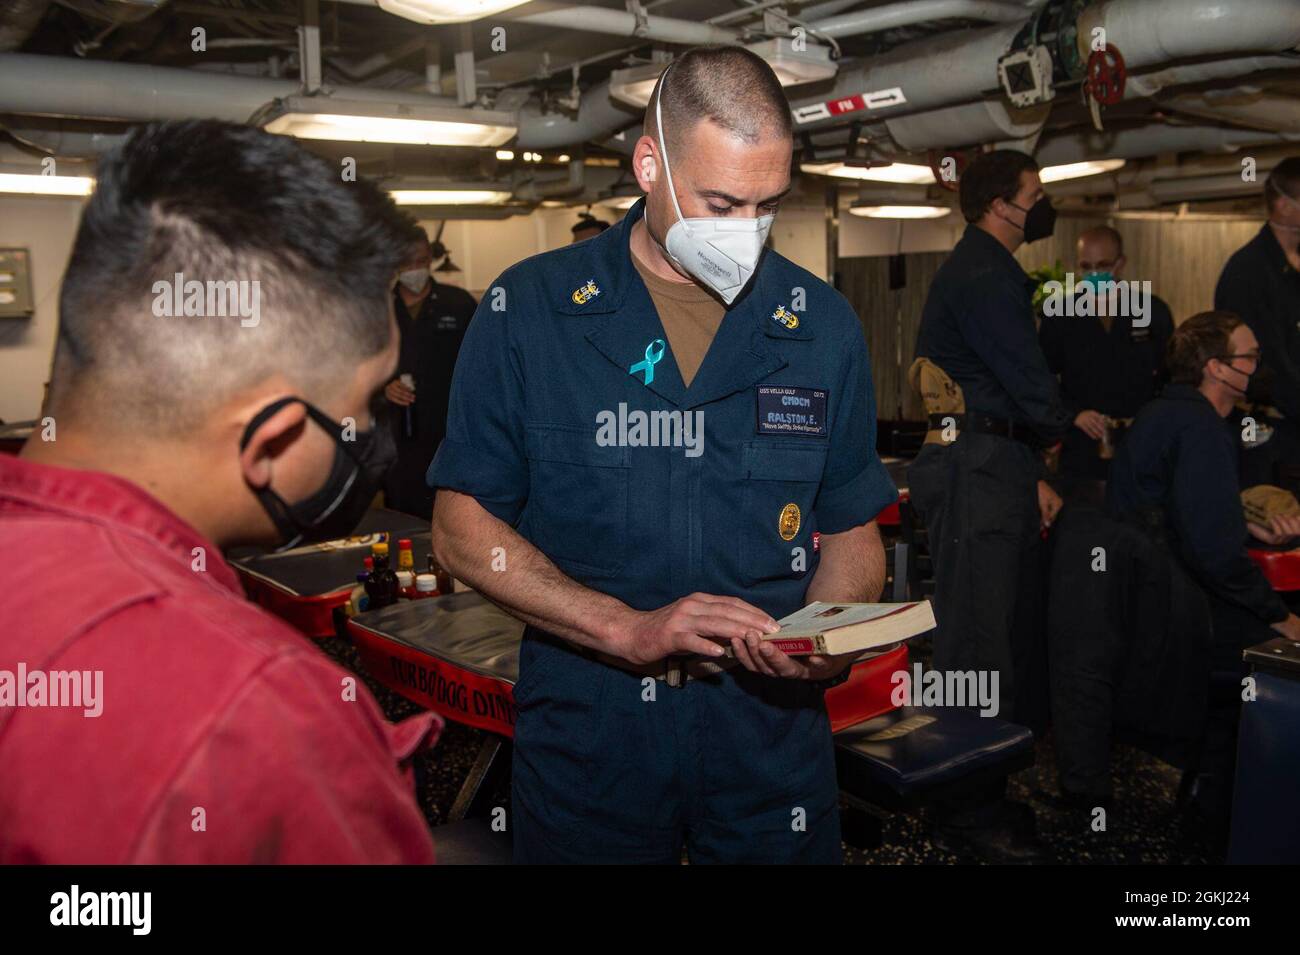 210427-N-RG587-2018 ATLANTIC OCEAN (April 27, 2021) CMDCM Eric Ralston, from Northglenn Colorado, command master chief of the Ticonderoga-class guided-missile cruiser USS Vella Gulf (CG 72), observes Holocaust literature during a Holocaust remembrance ceremony April 27, 2021. Vella Gulf is operating with the IKE Carrier Strike Group on a routine deployment in the U.S. Sixth Fleet area of operations in support of U.S. national interests and security in Europe and Africa. Stock Photo